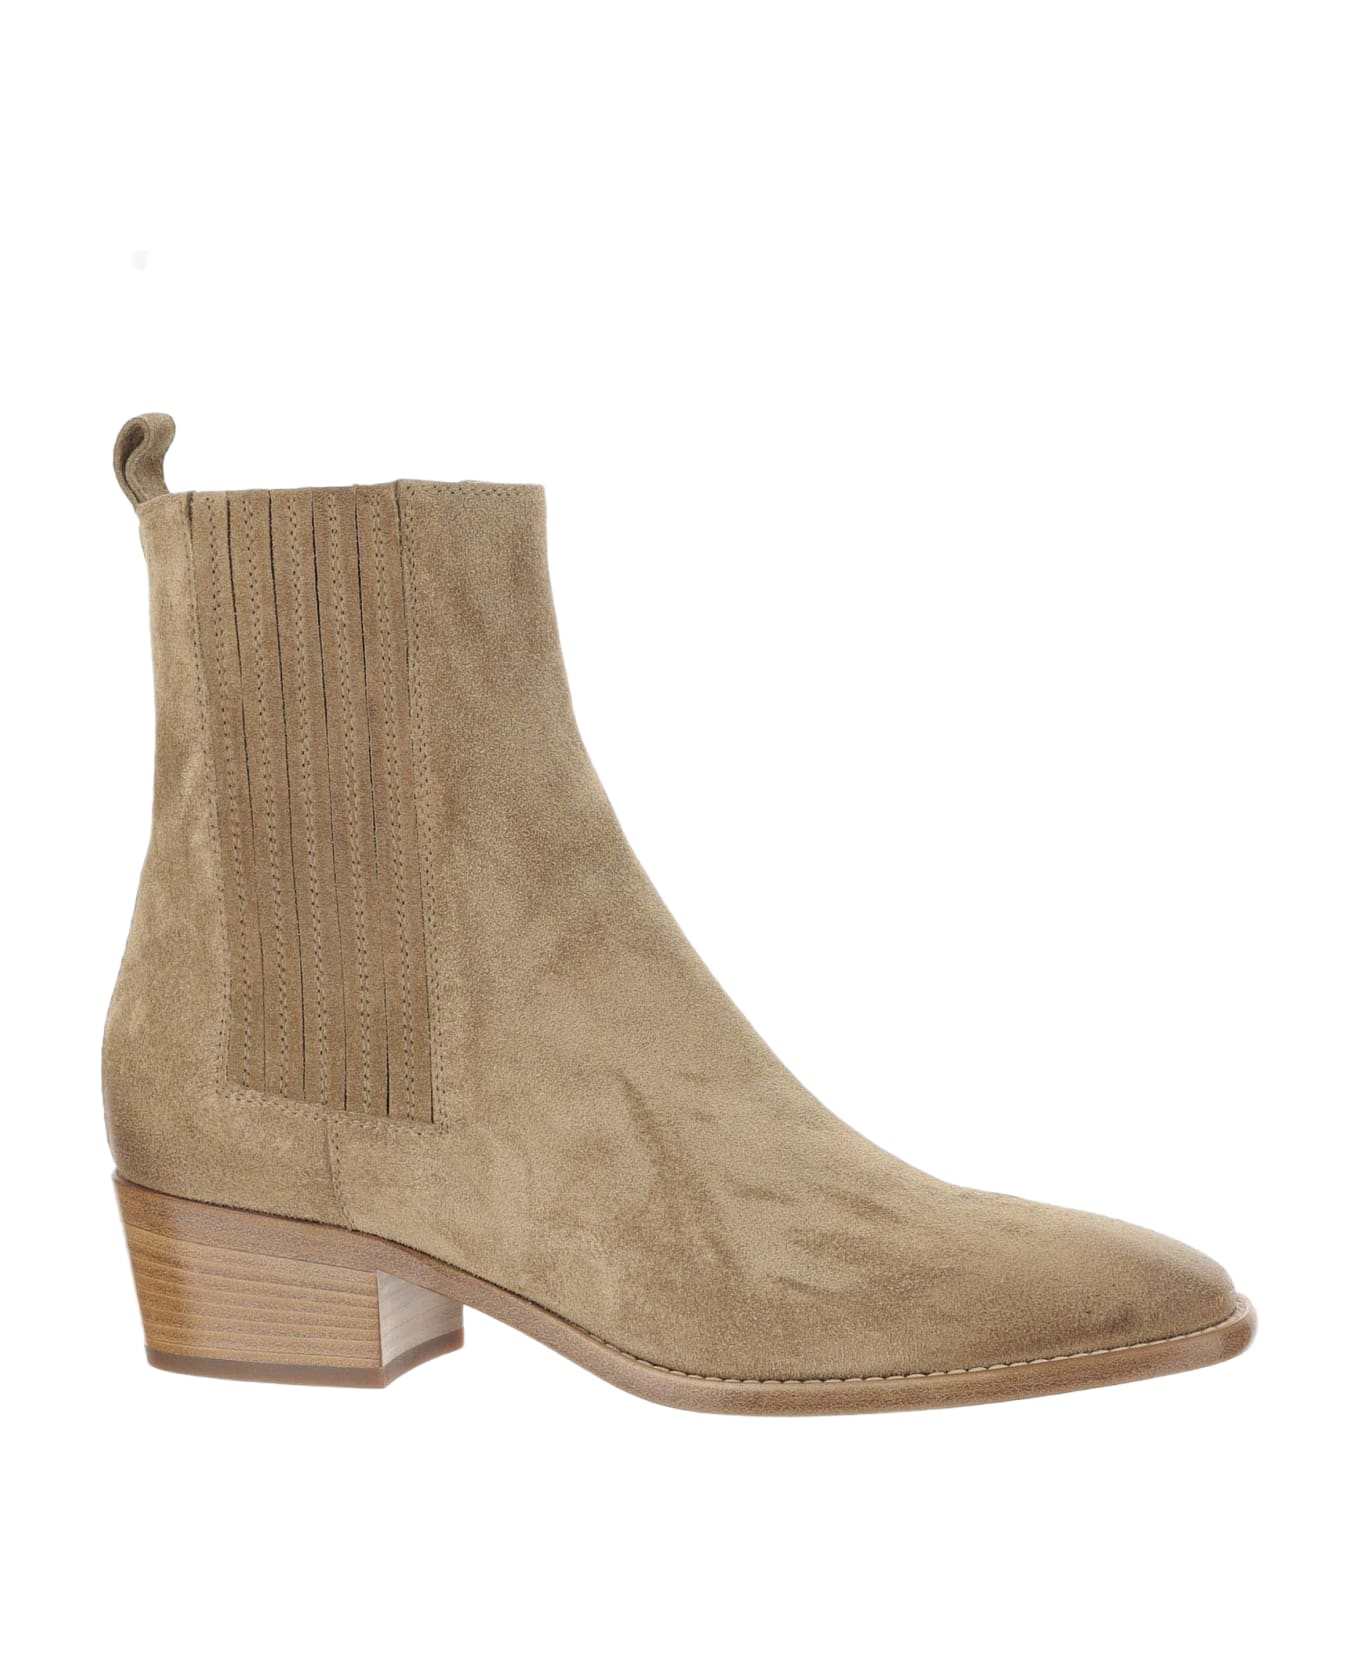 Sartore Suede Ankle Boots - Beige ブーツ